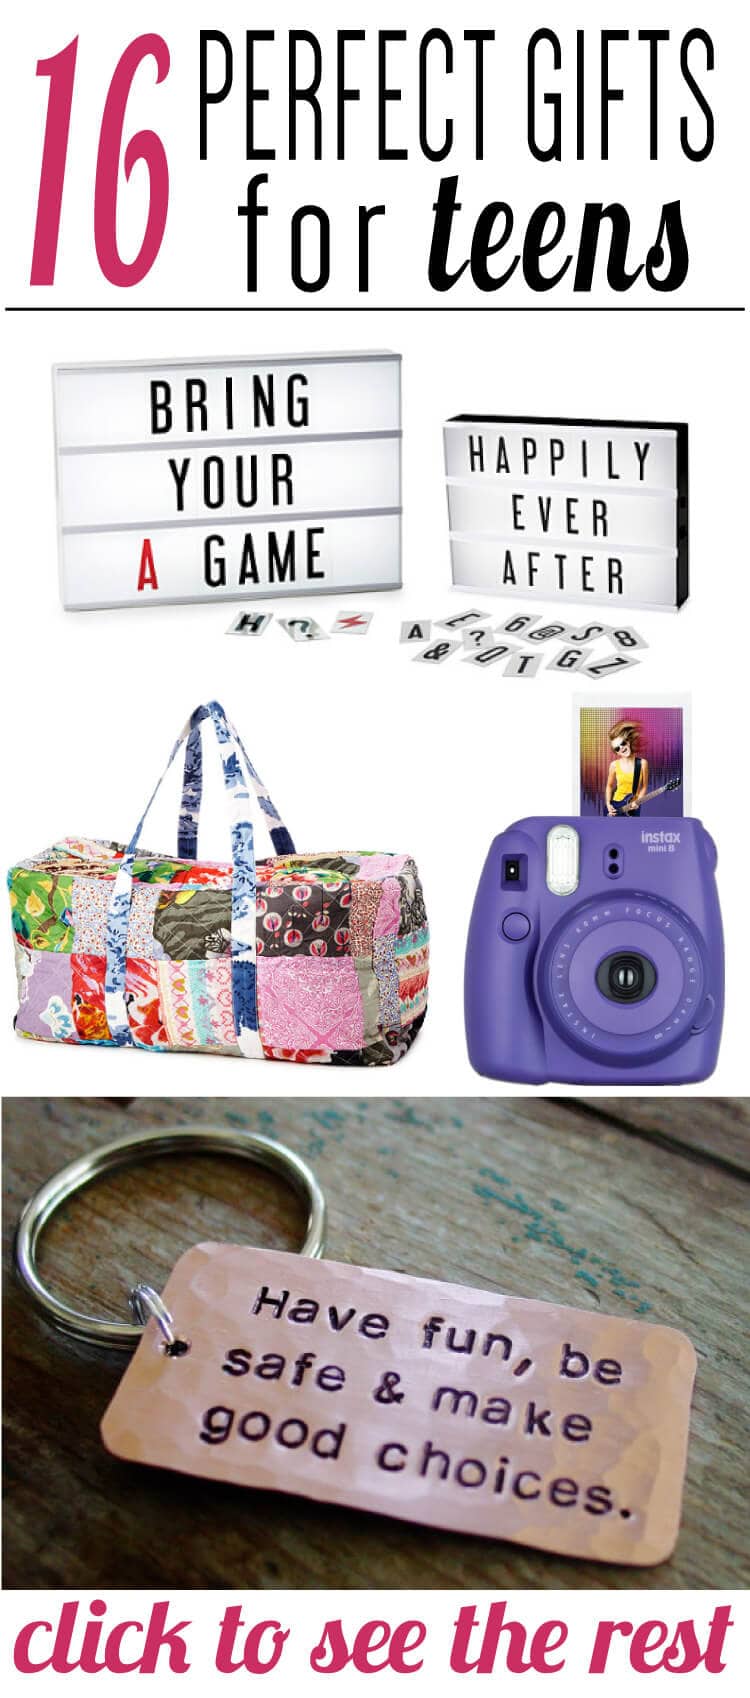 OMG, teens are so hard to shop for! I get so stressed out when I need to find a gift for a teen, but I don't just want to buy them gift cards. So happy I found this list of cool gifts for teens. So many awesome ideas of what to buy teens in your life.